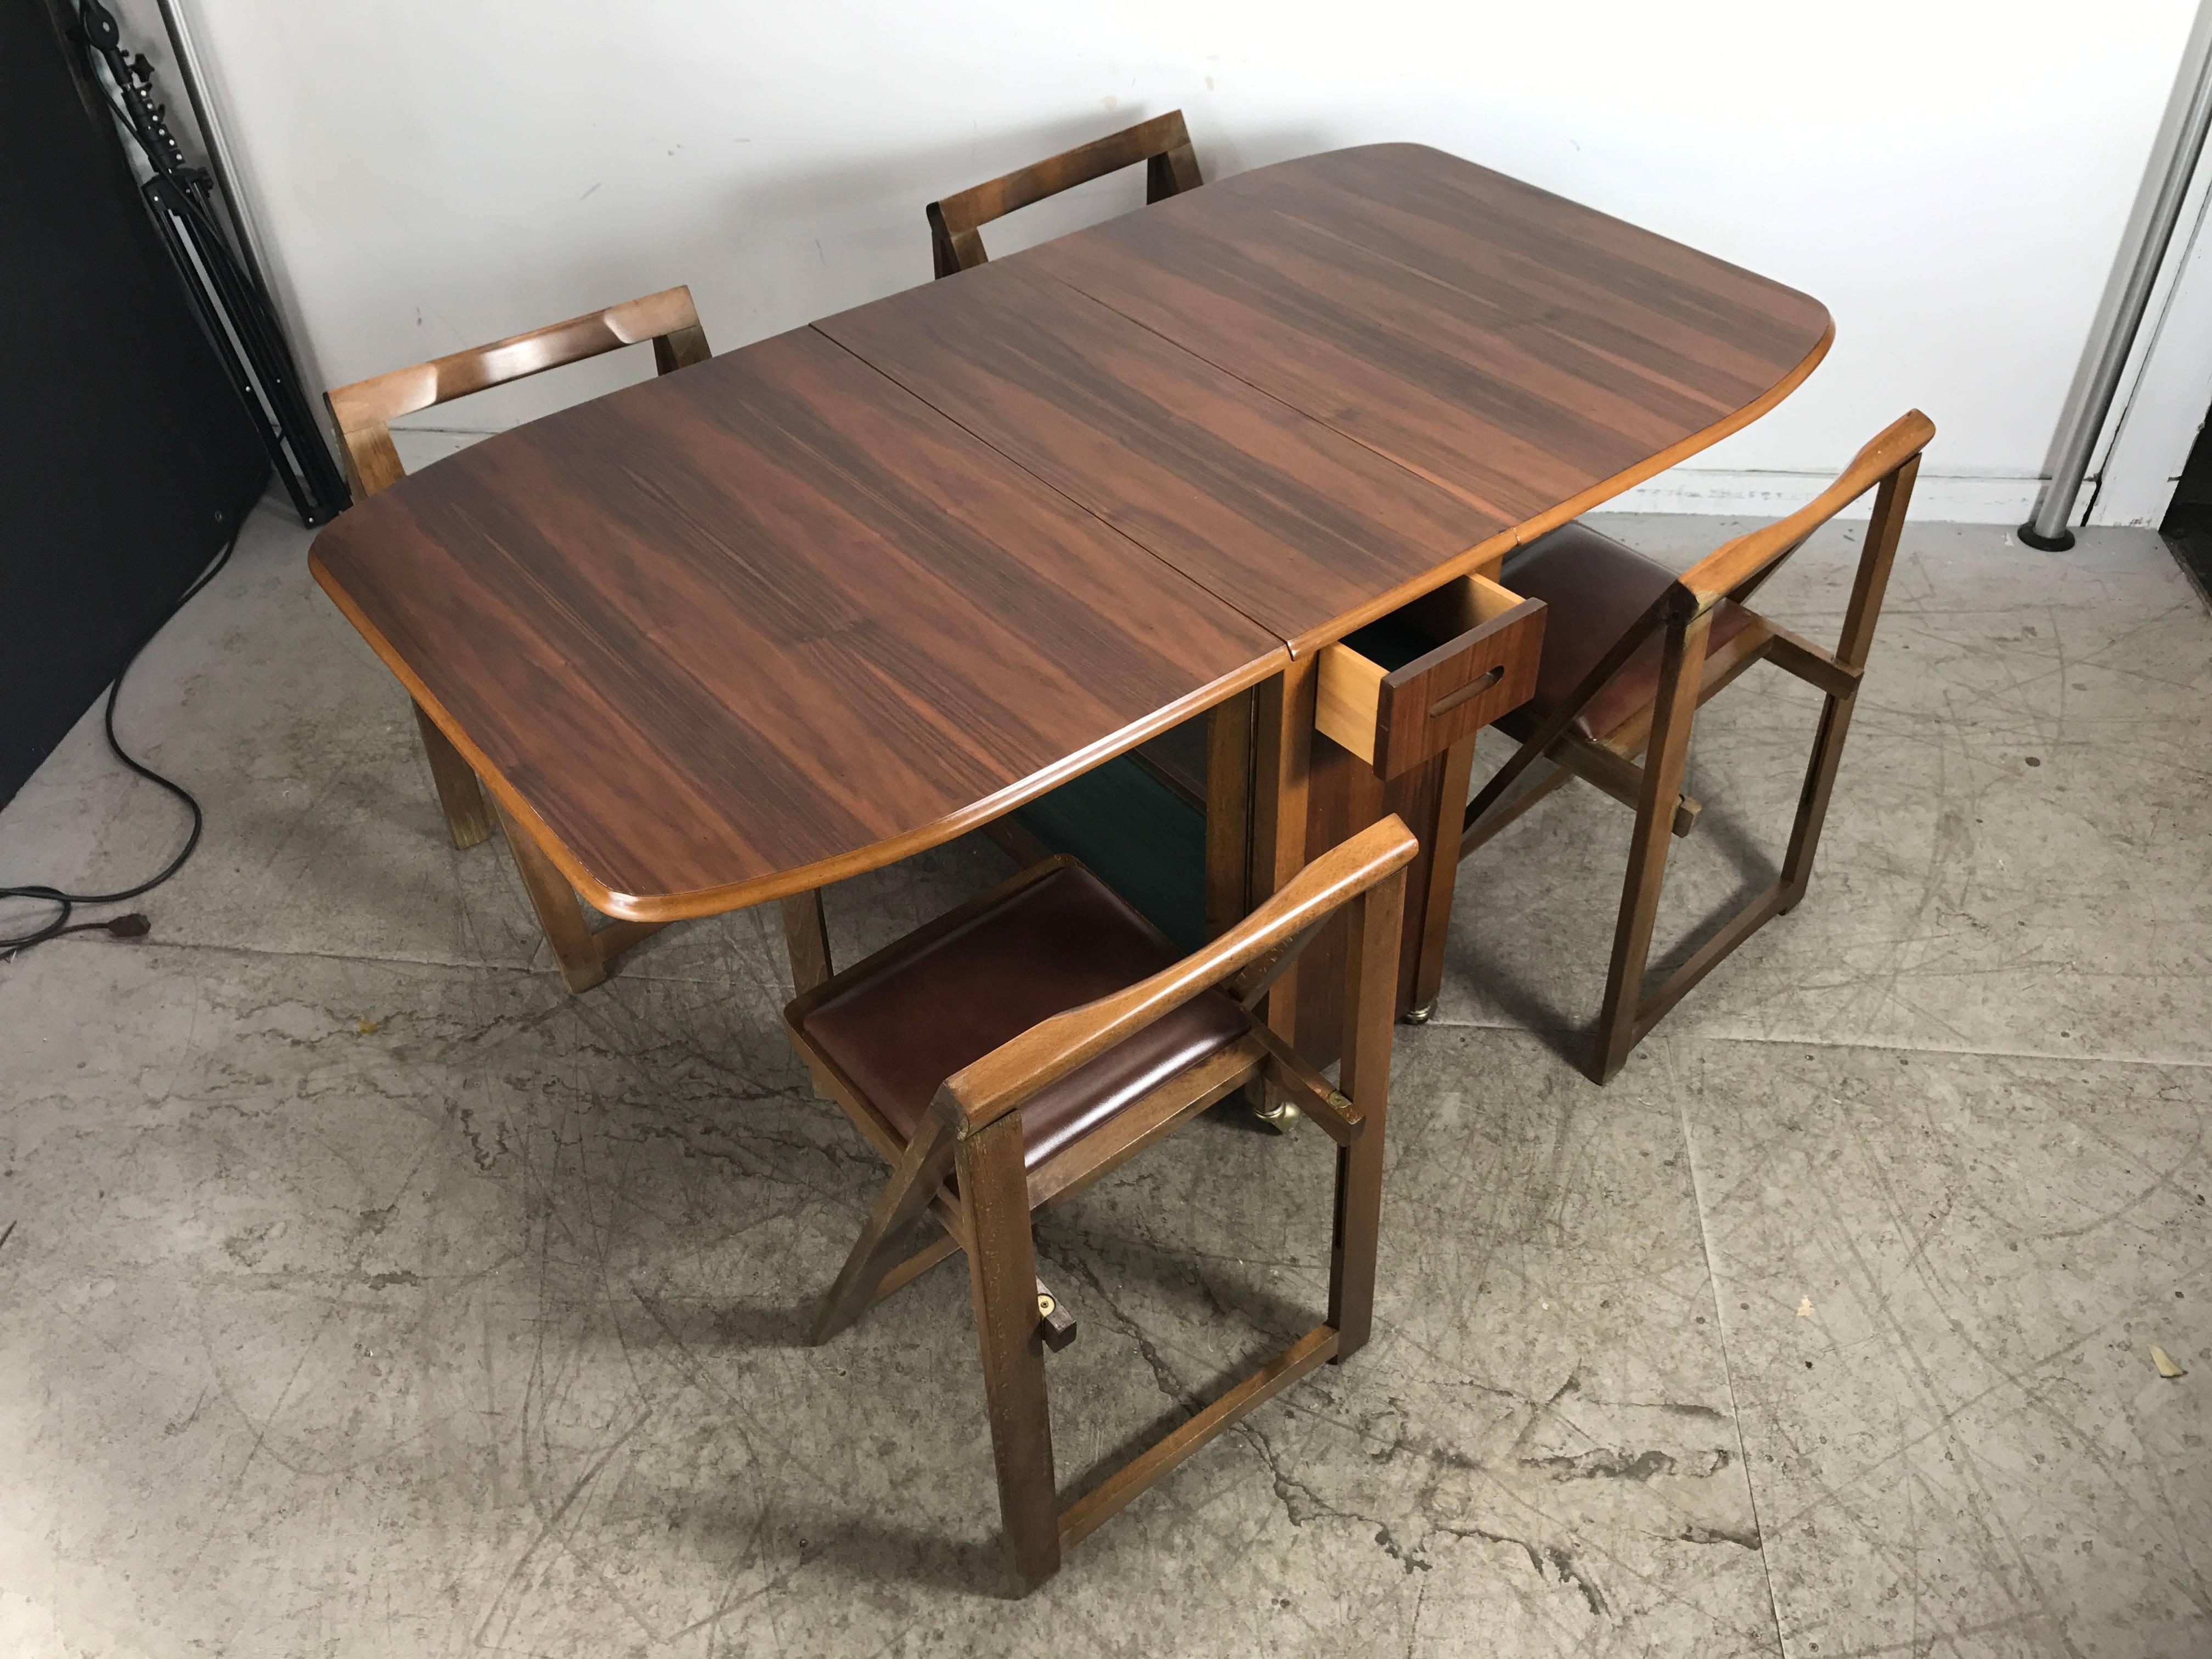 Modernist Suitcase Dining Table, Fold Down, Compact Self Stored Chairs 2